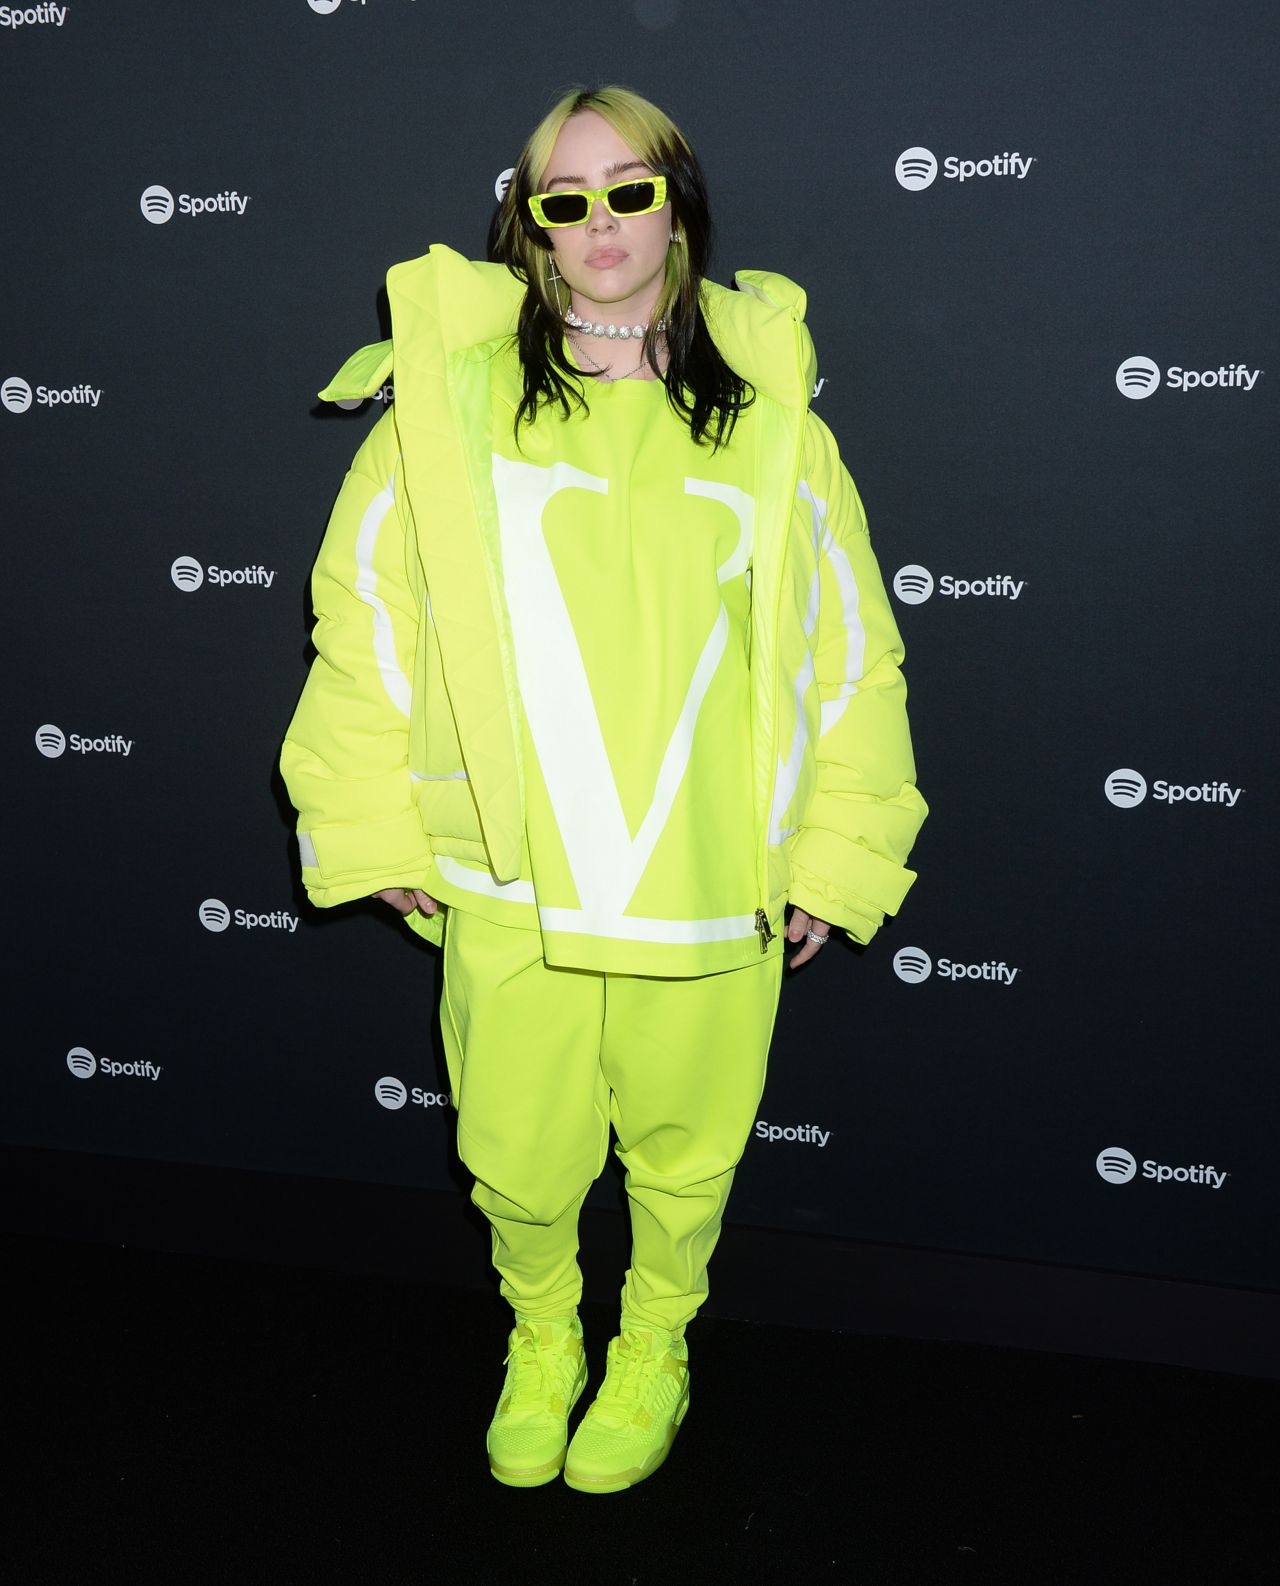 Billie Eilish In Neon Outfit @ Spotify Best New Artist 2020 Party in LA ...